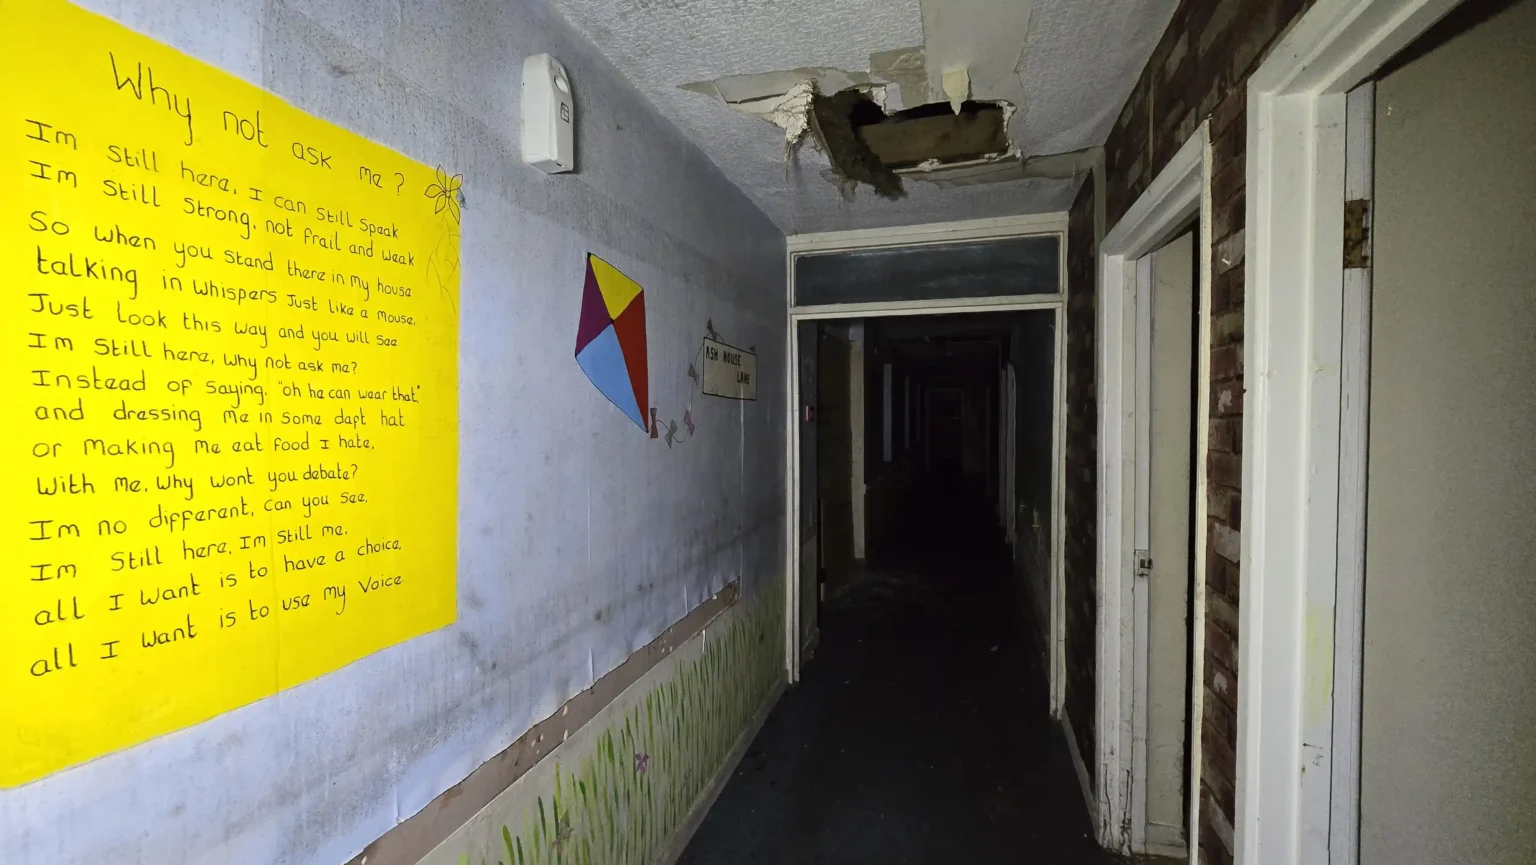 Urban explorer discovers haunting poems about respecting dementia patients in abandoned Sheffield care home. The grand yet eerie Ash House has been neglected since 2016.